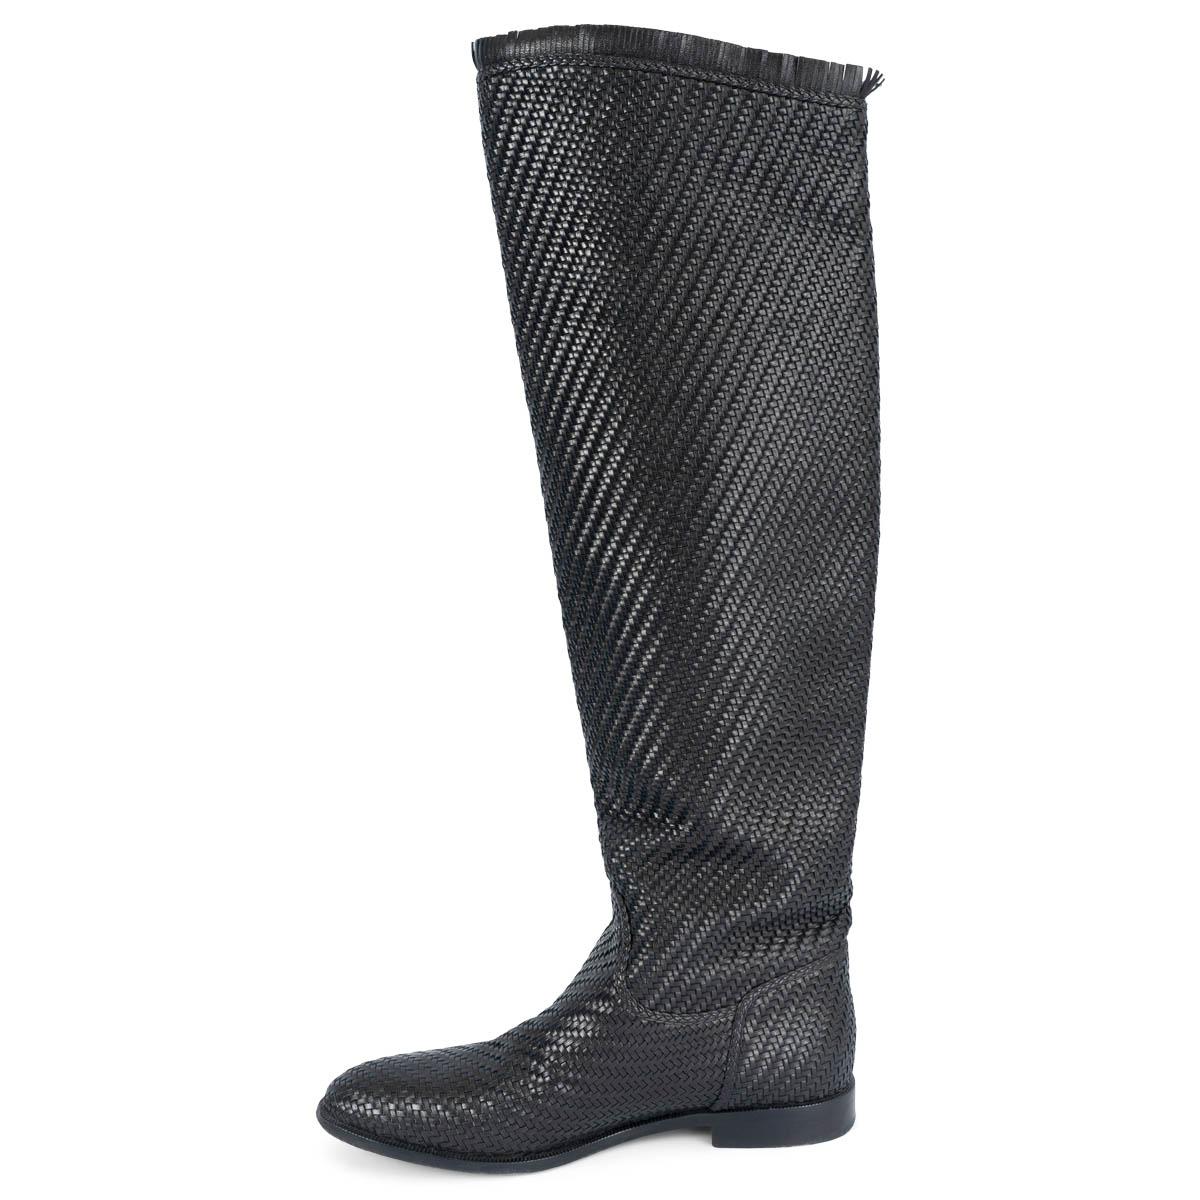 Black CHRISTIAN DIOR black woven leather 2020 GLOBAL RIDING Boots Shoes 38.5 For Sale